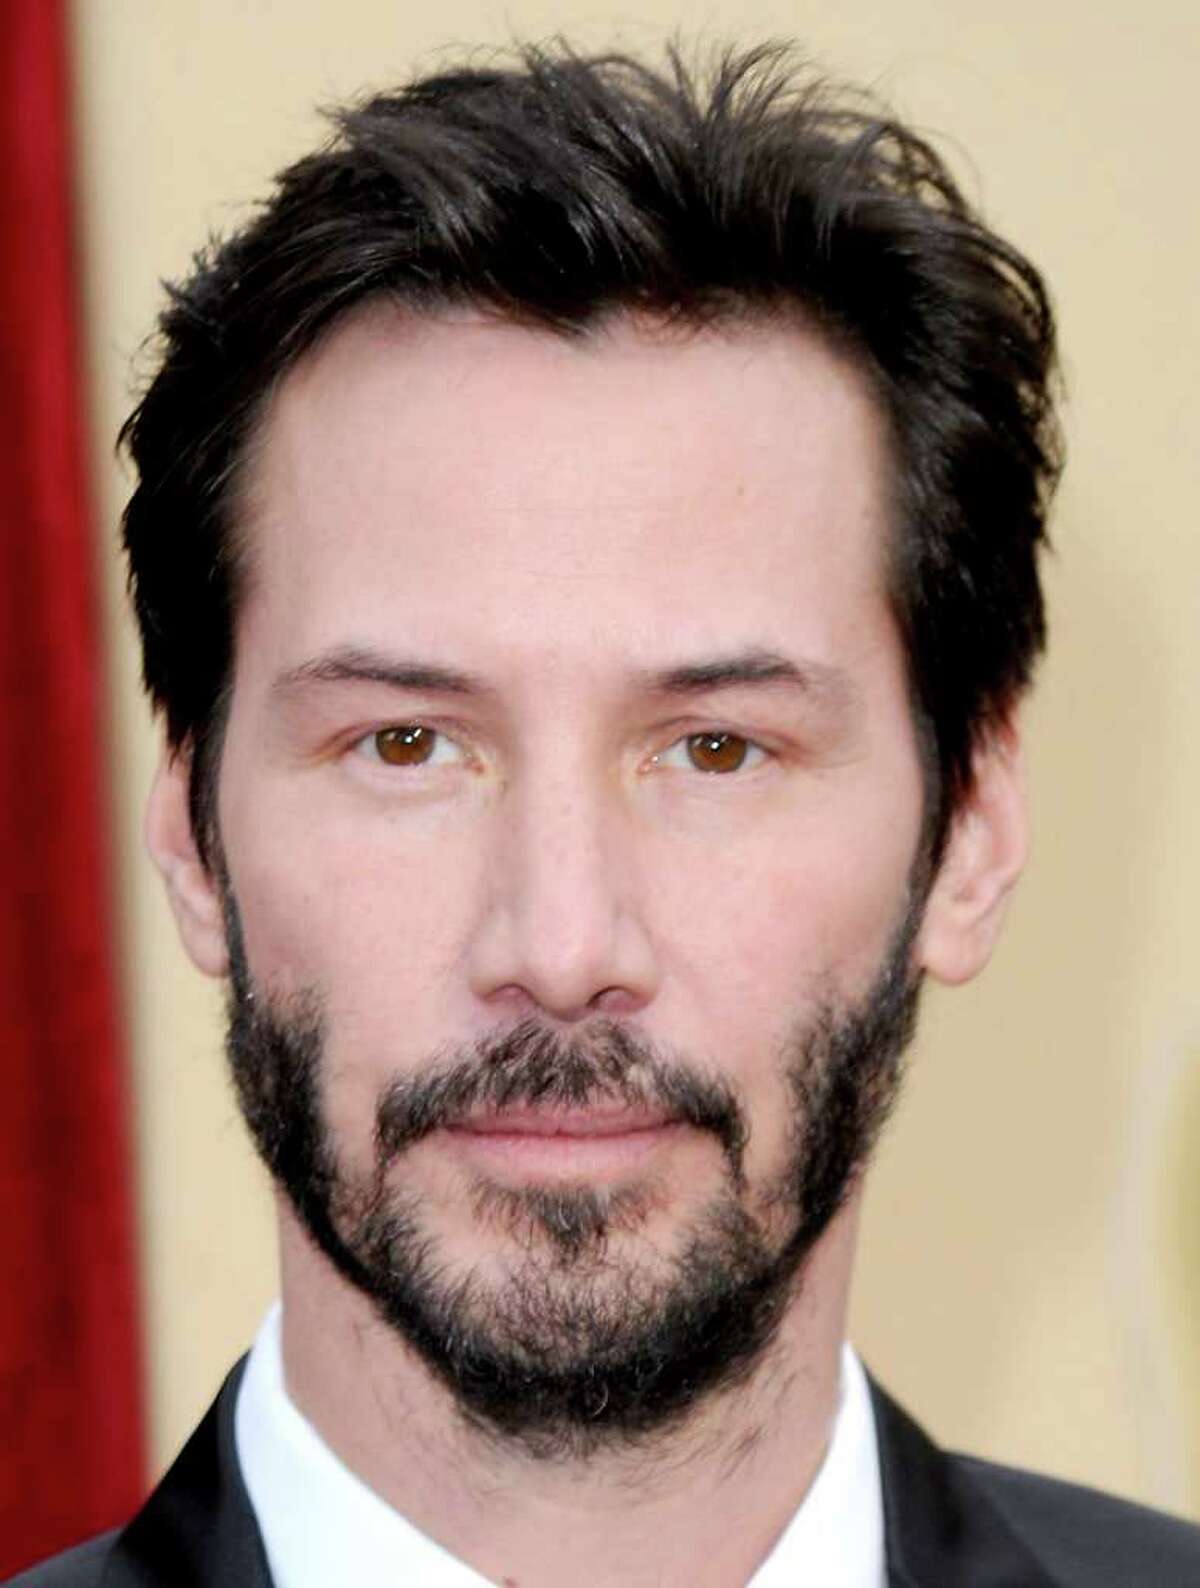 The seattlepi.com staff, having heard Rotten Tomatoes data on the worst-ever actor and actress, put together a larger list of 40 -- not THE 40, but 40 -- worst actors and actresses. To start off, here's an obvious one: Keanu Reeves.